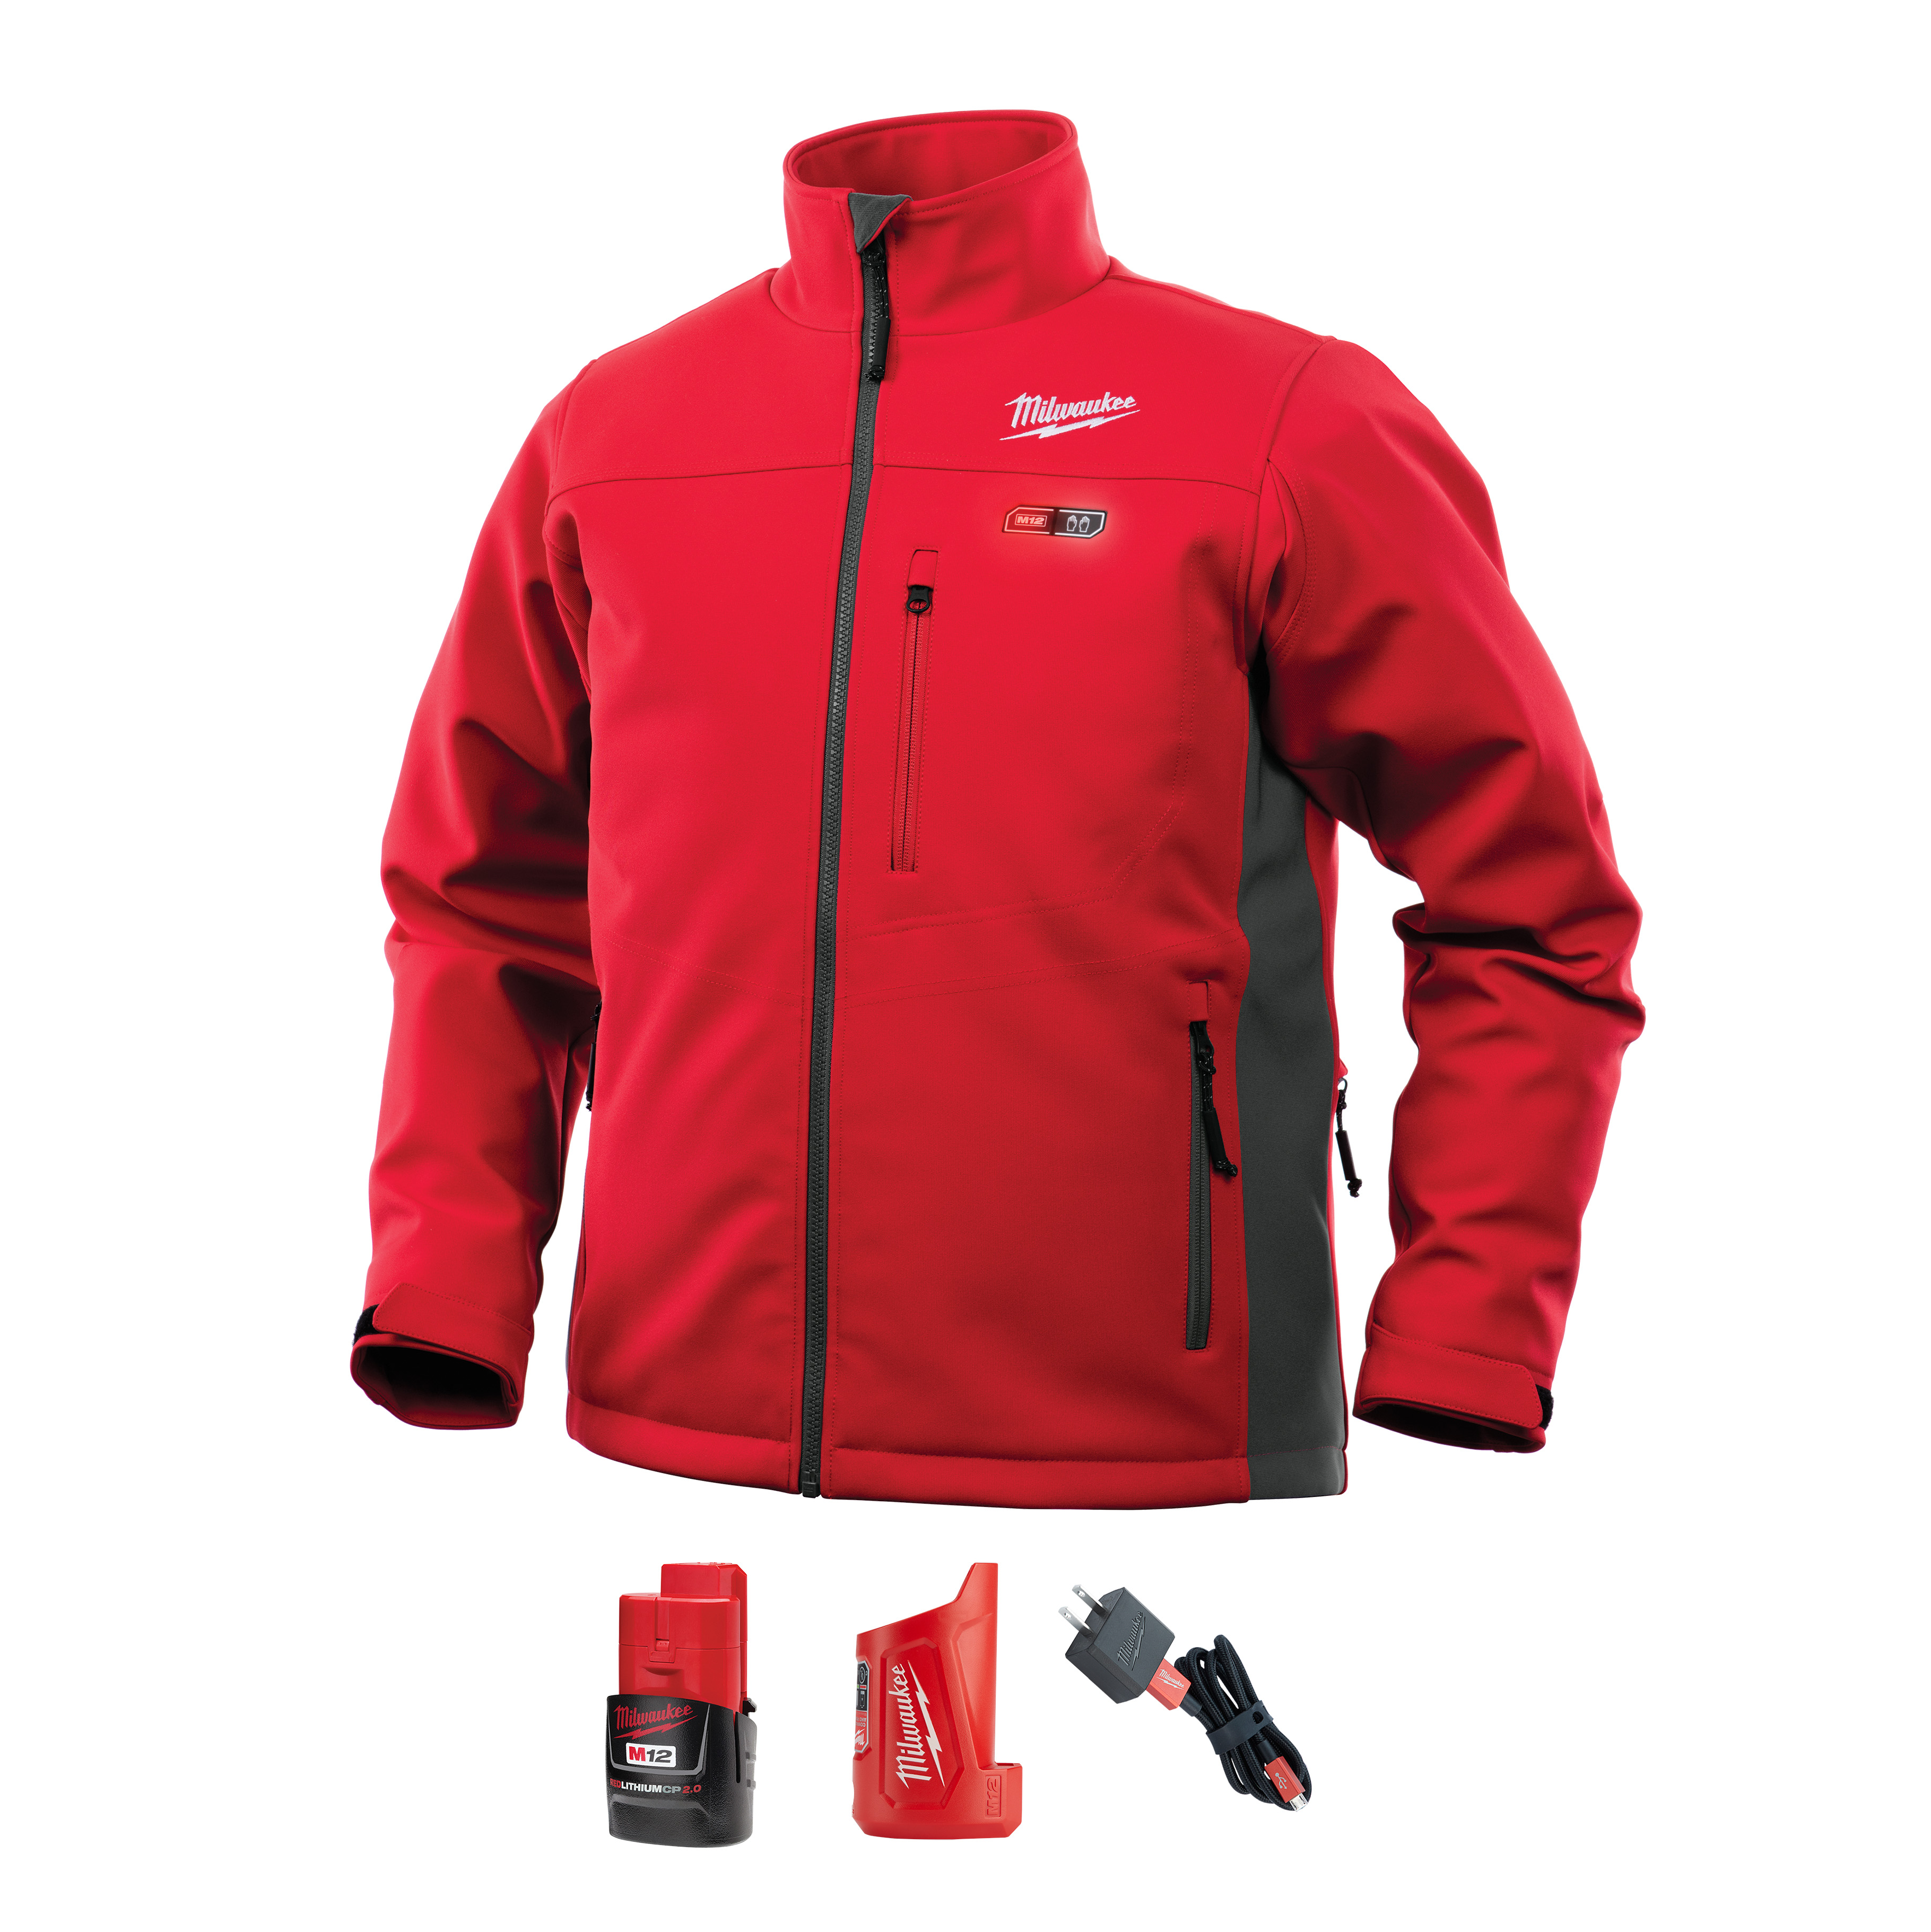 Powered by M12™ REDLITHIUM™ battery technology, Milwaukee® M12™ heated ToughShell™ jackets use carbon fiber heating elements to create and distribute heat to the chest, back, and front hand pockets. A one-touch LED controller allows users to select from three heat settings, delivering ideal heat for any environment. The new quick-heat function allows users to feel heat 3X faster than previous jackets and market competitors. For use in abrasive environments, ToughShell™ stretch polyester delivers 5X longer life than previous QuietShell jackets, and provides wind and water resistance to survive the elements. 22361